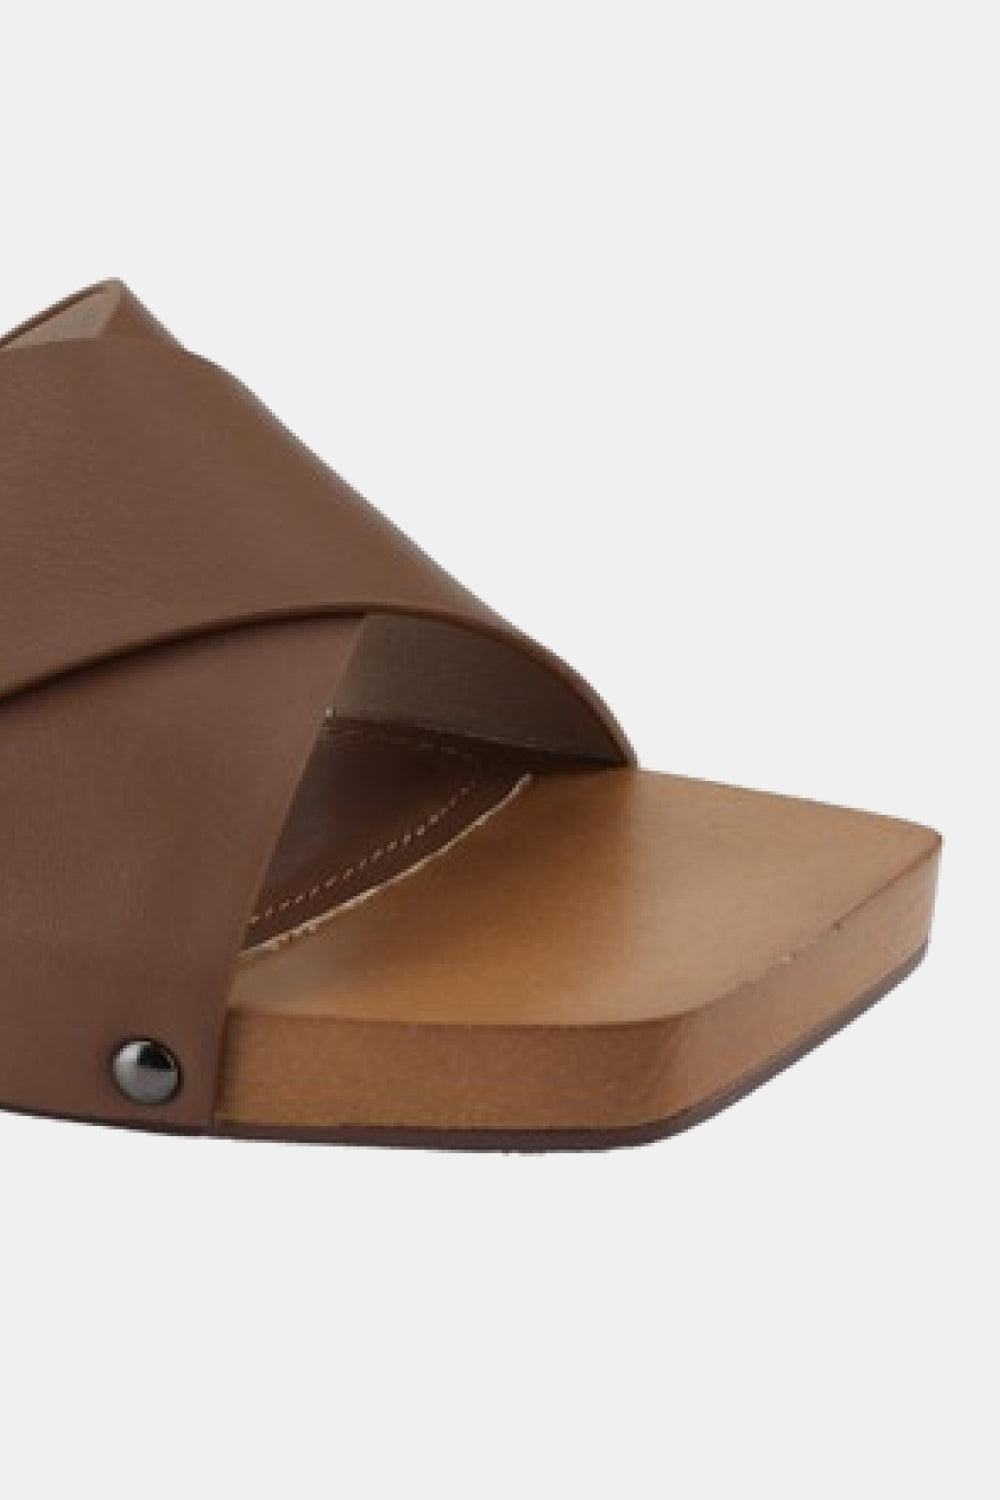 Weeboo Step Into Summer Criss Cross Wooden Clog Mule in Brown